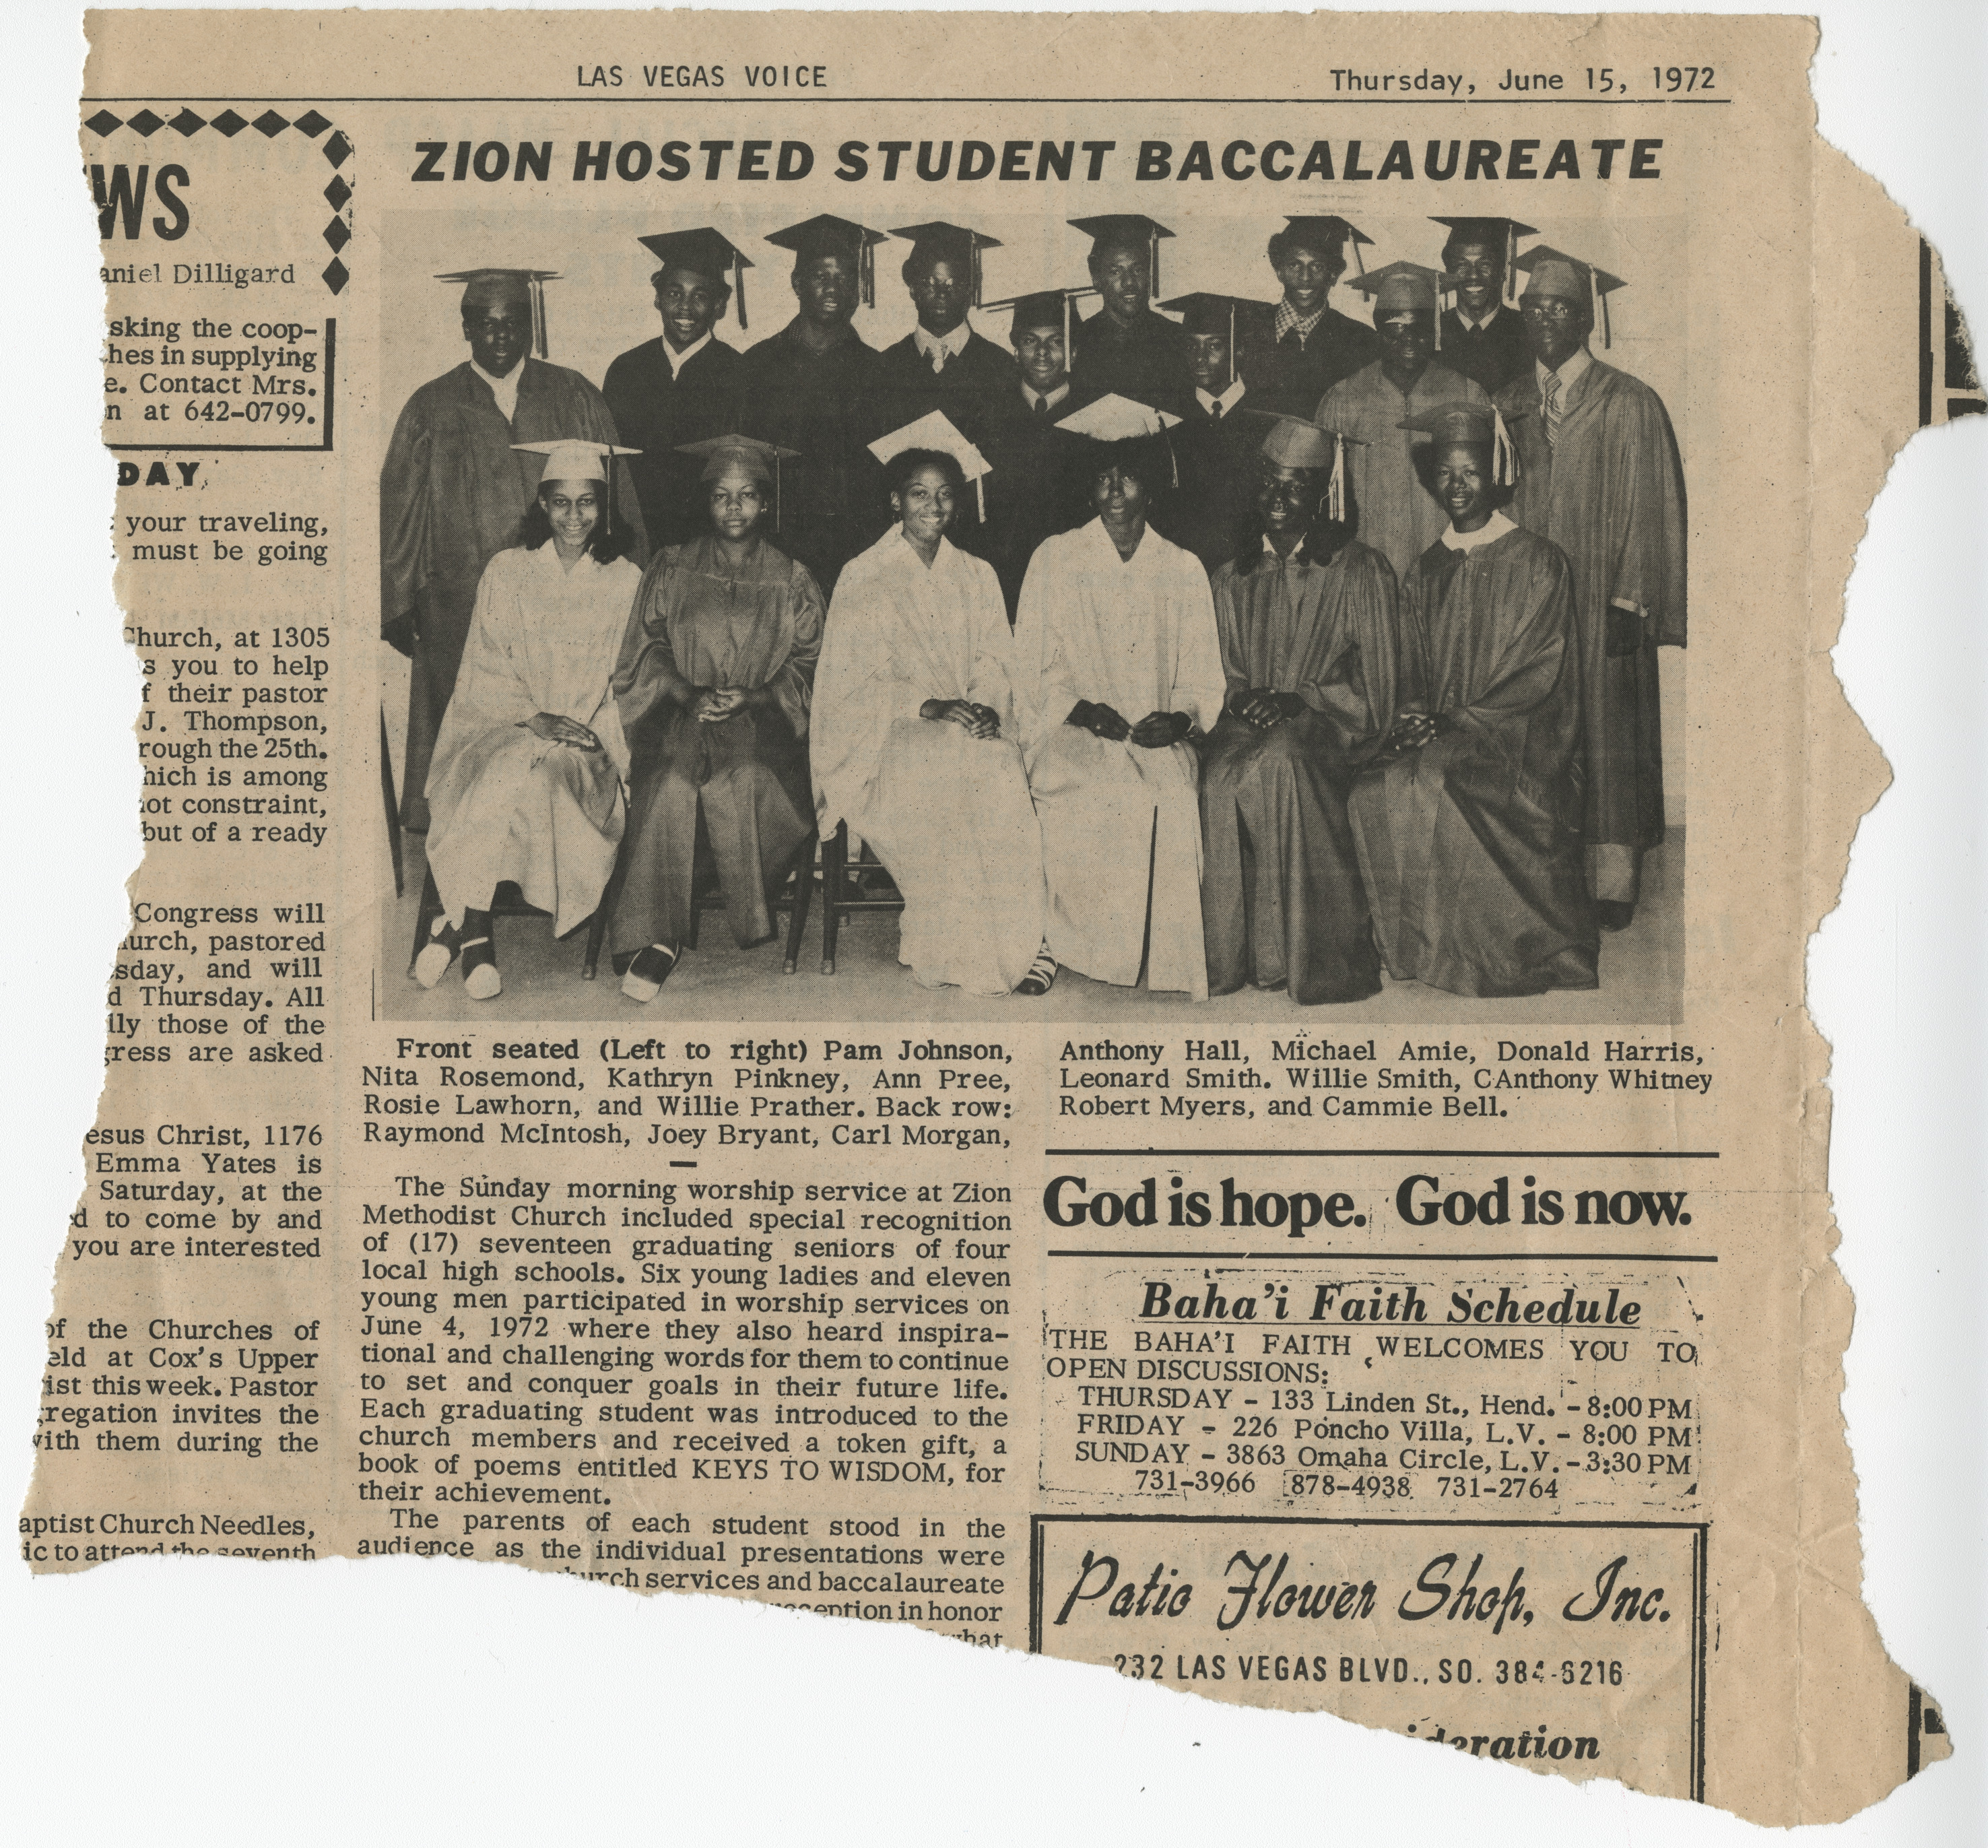 Newspaper clipping, Zion Hosted Student Baccalaurate, Las Vegas Voice, June 15, 1972